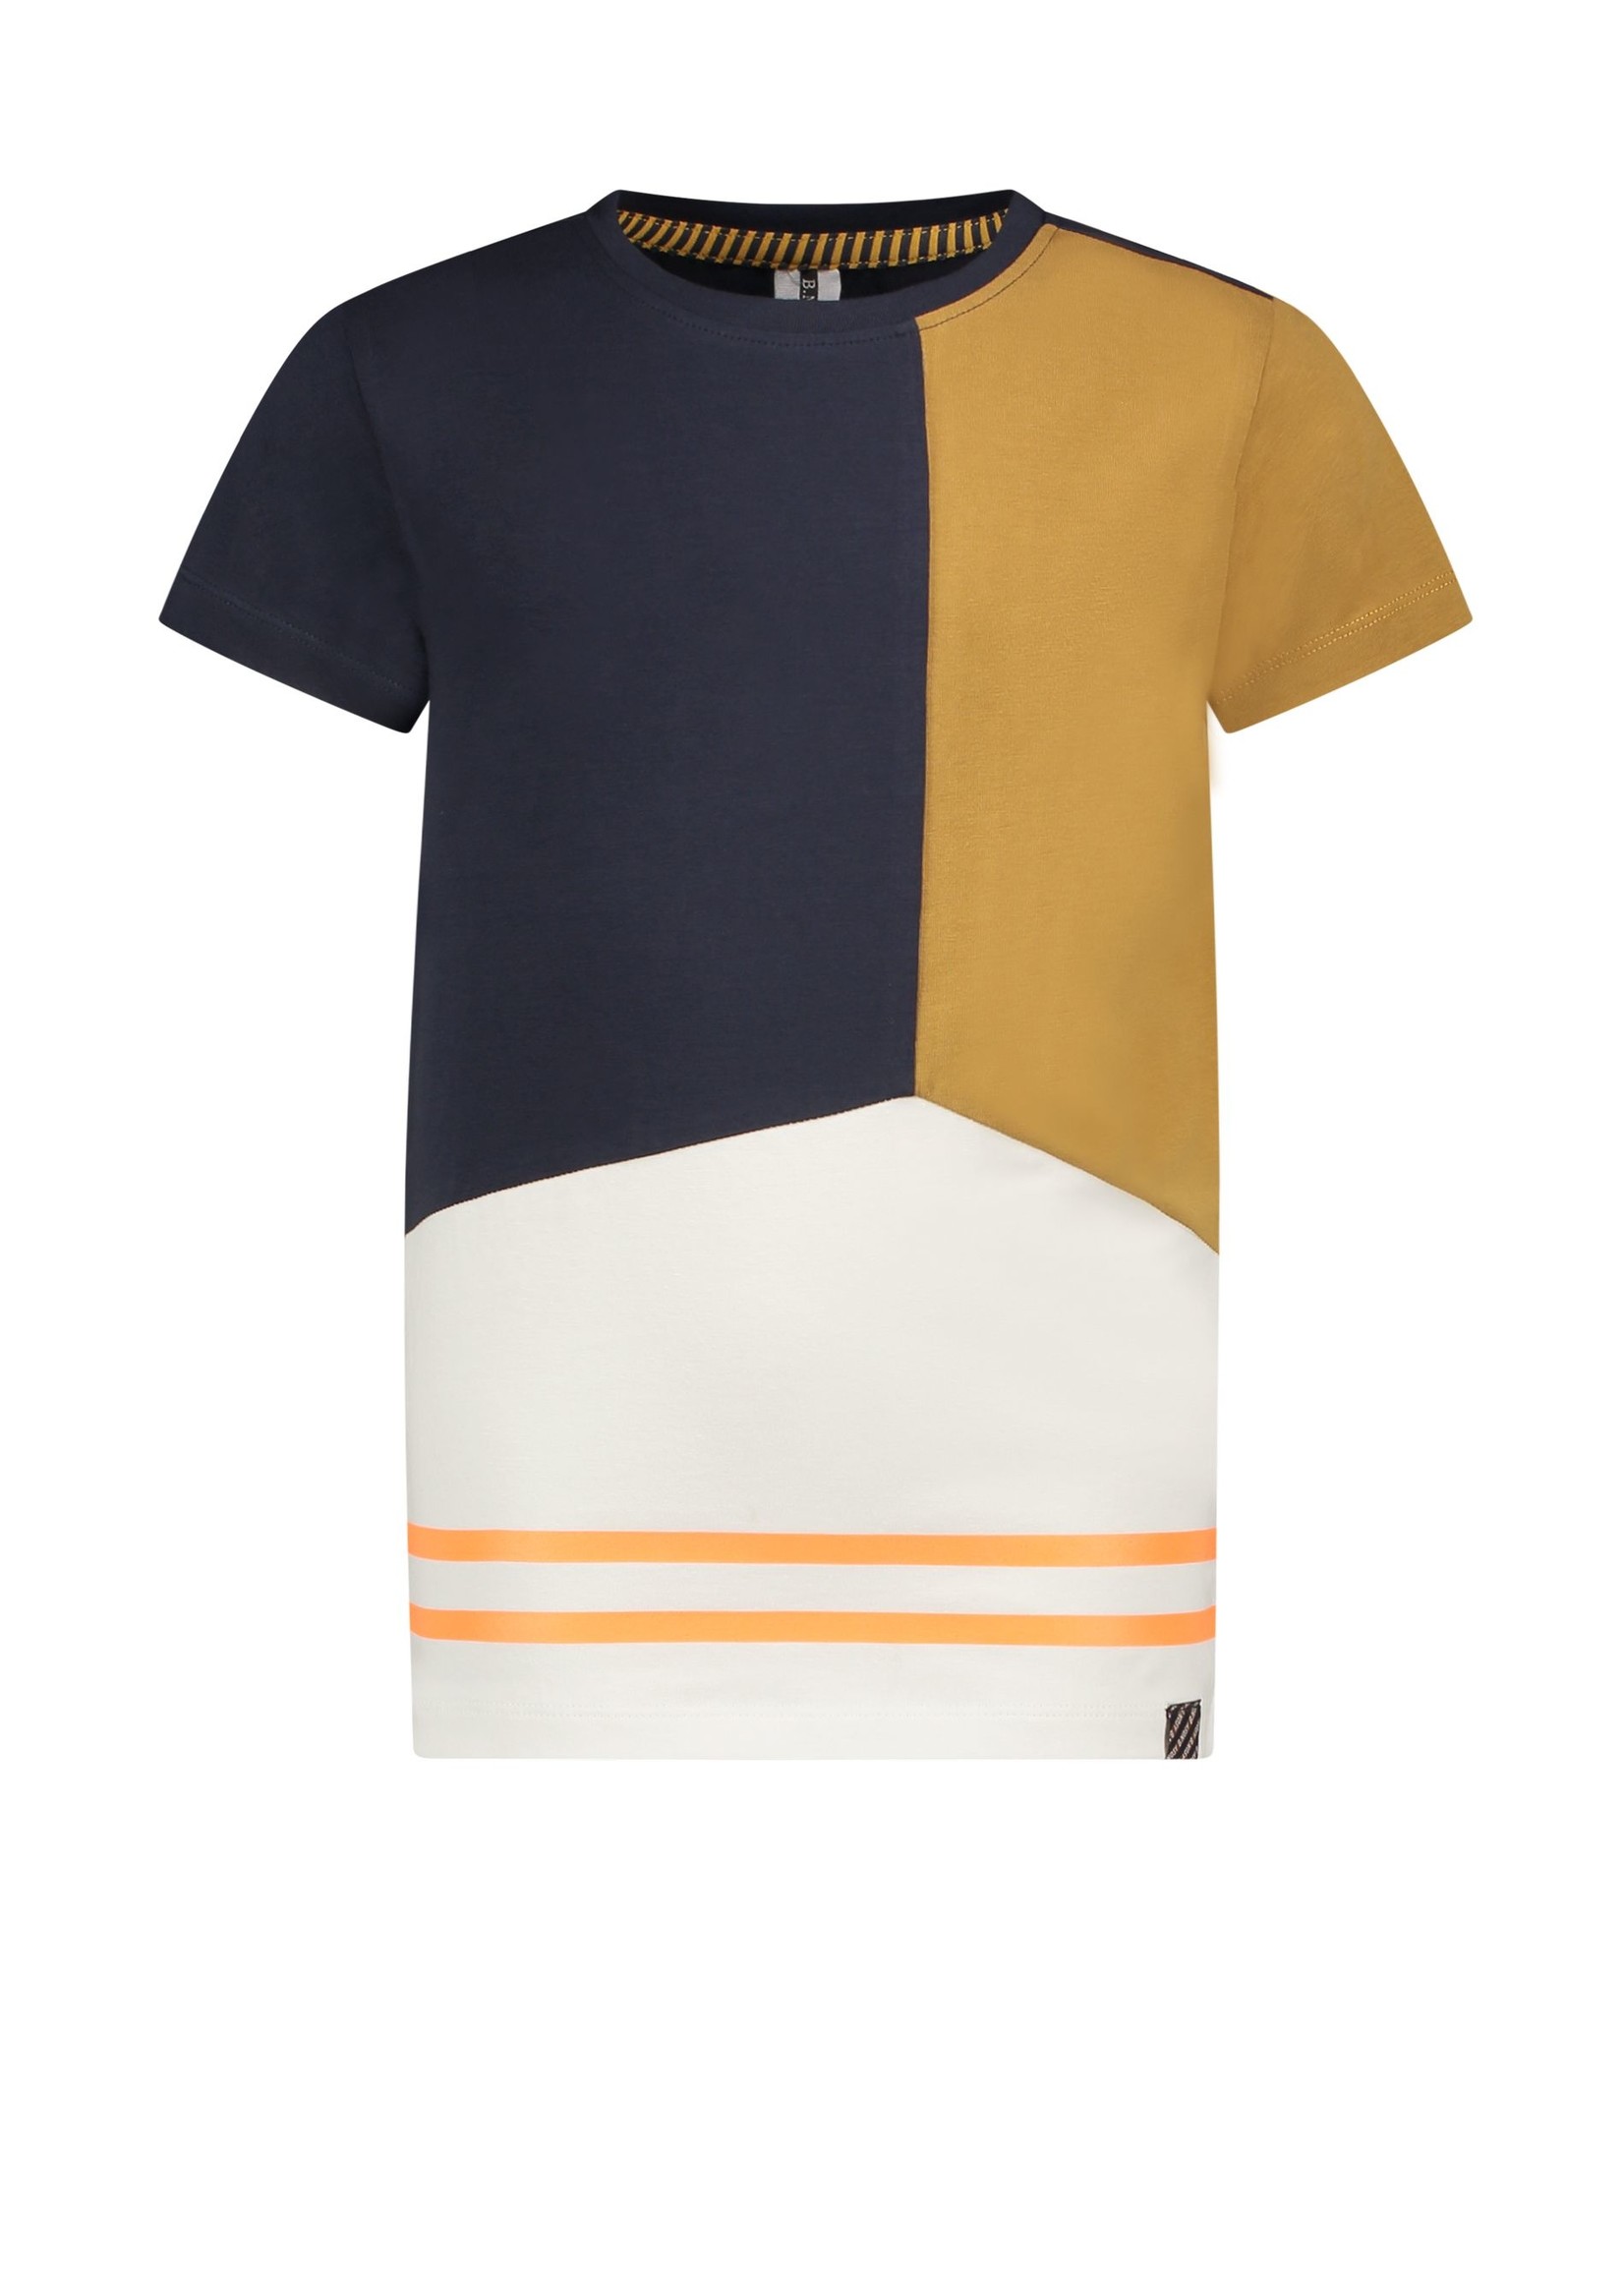 B-Nosy Boys t-shirt with c&s parts and double printed stripe at hem, Cotton